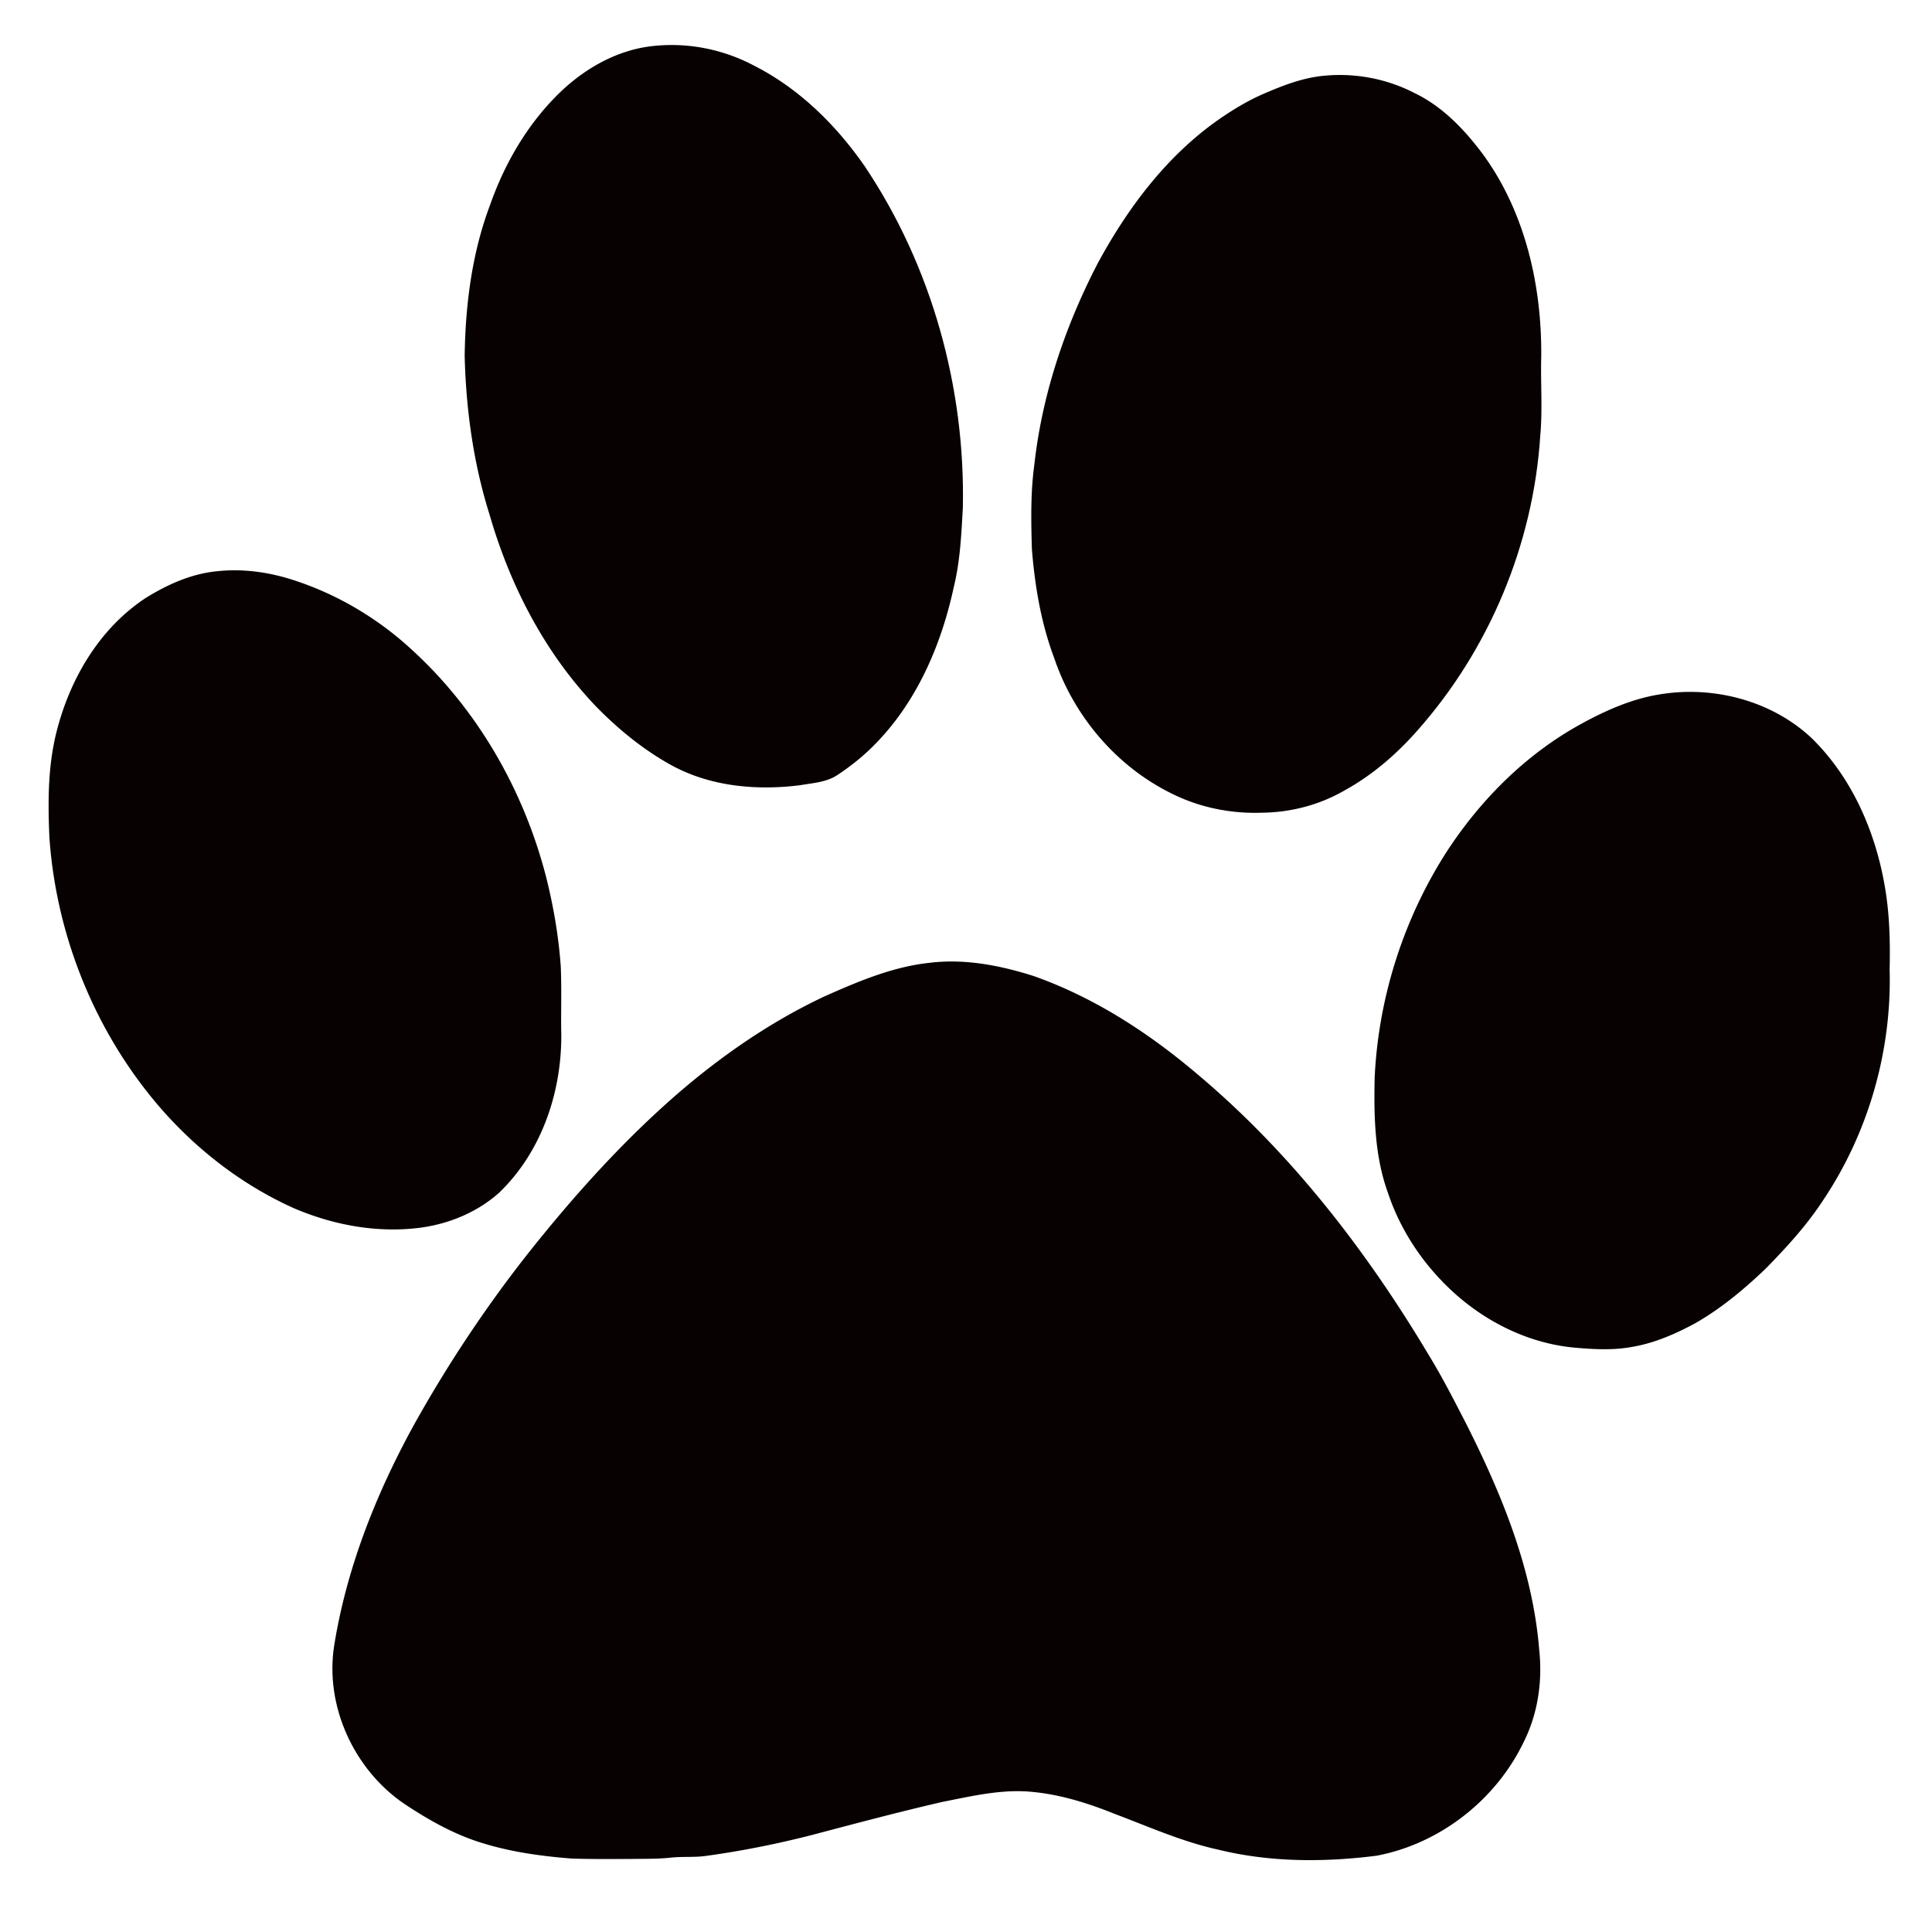 Images of Paw Prints | 2500x2500